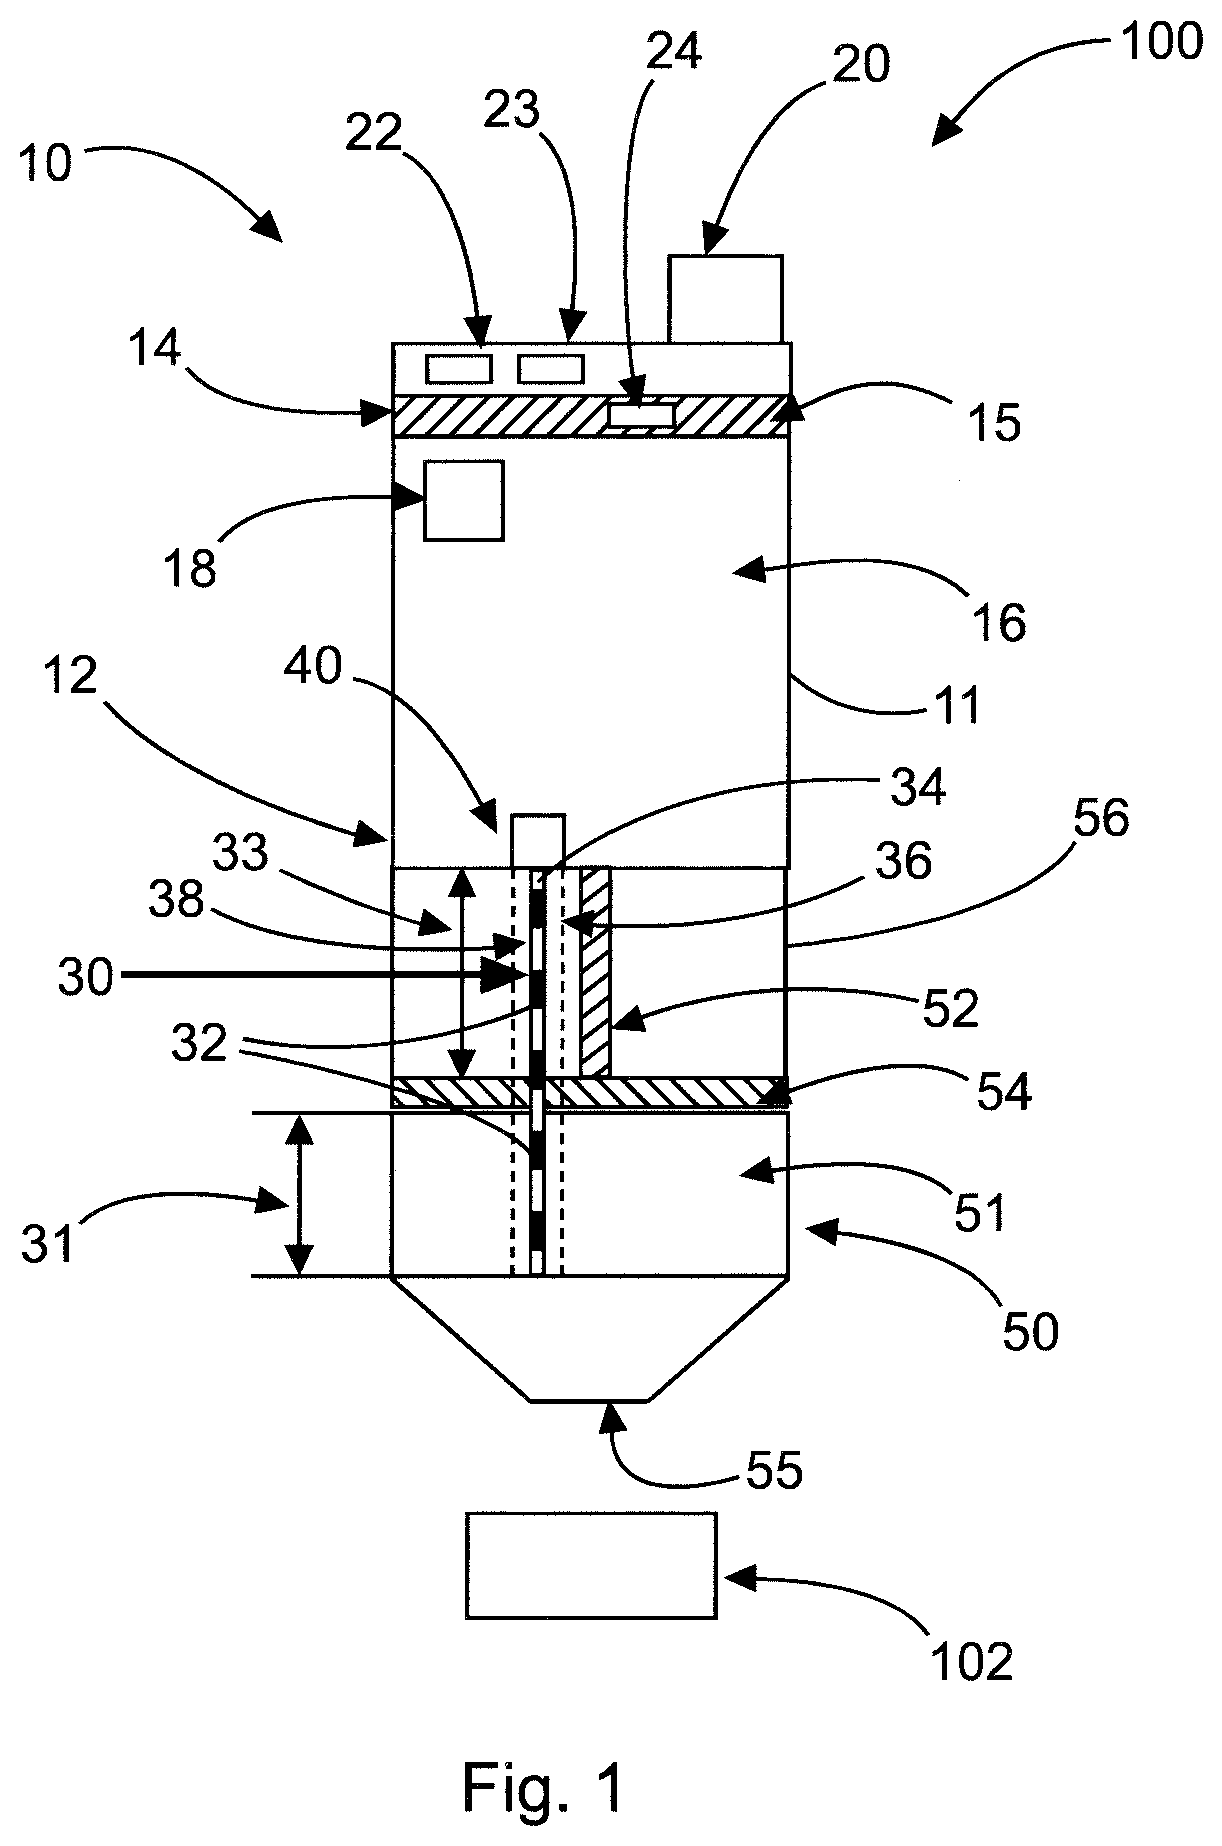 Automatic lubrication system for lubricating an object